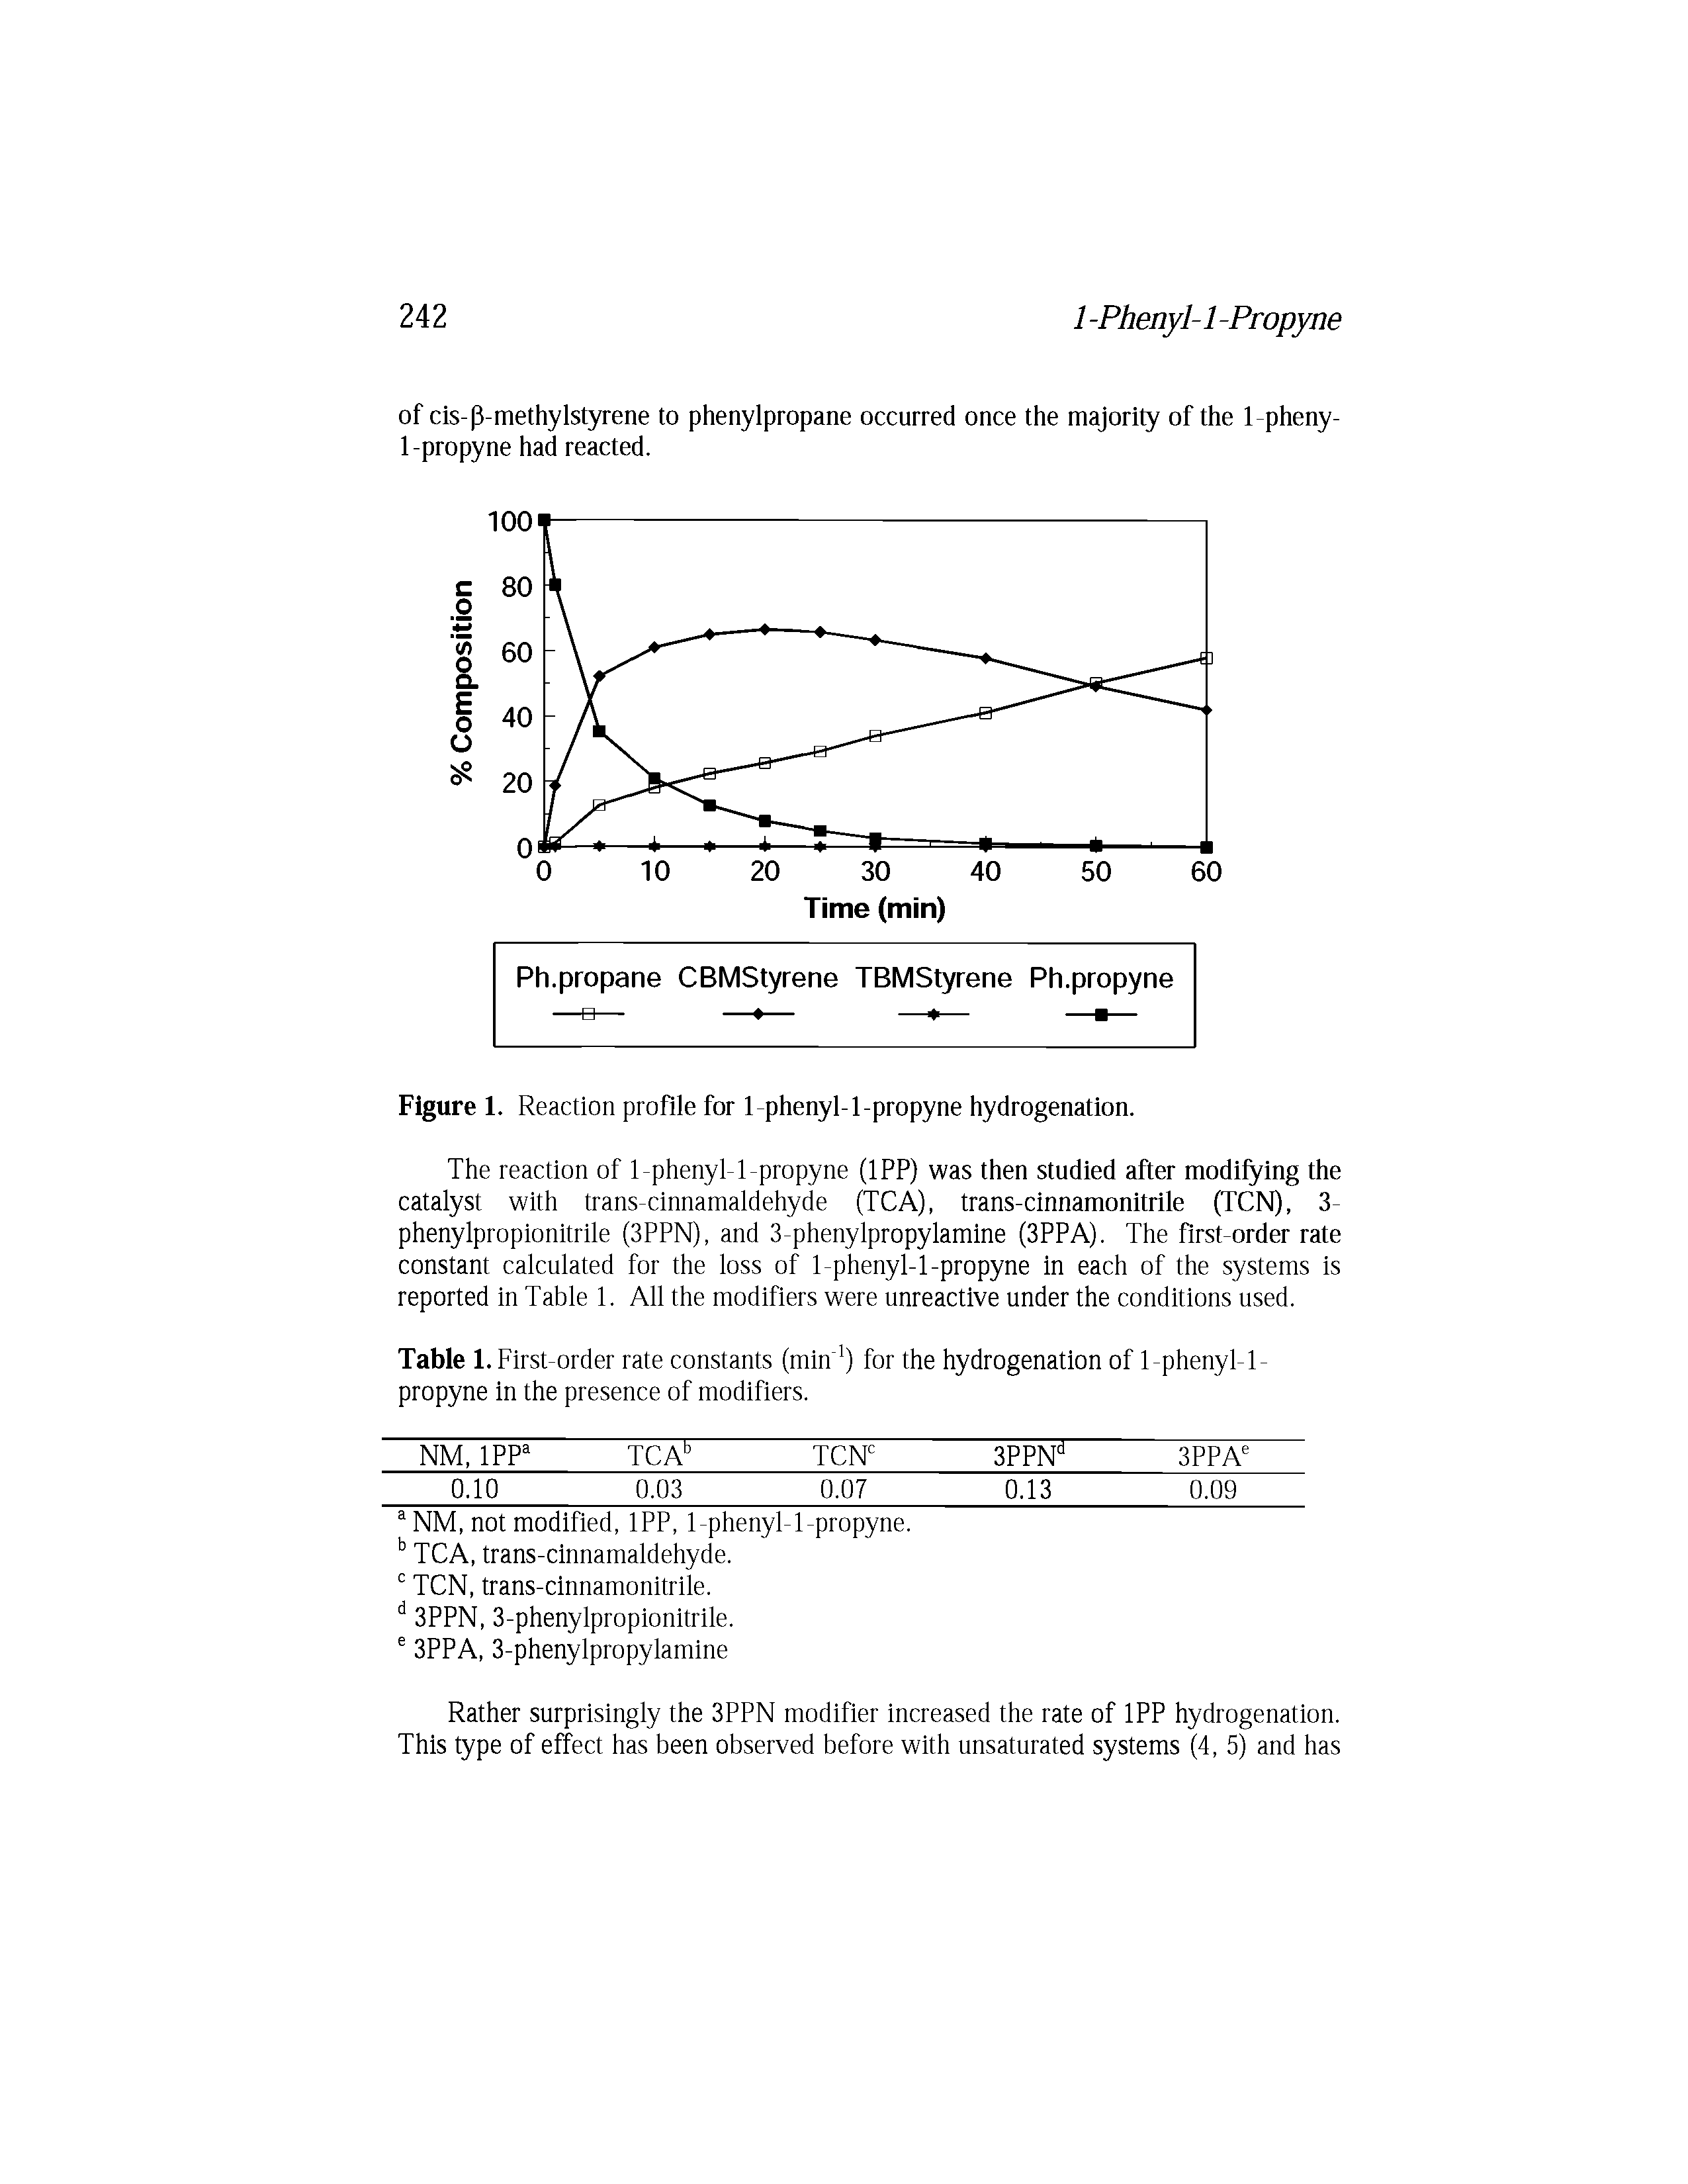 Figure 1. Reaction profile for 1-phenyl-l-propyne hydrogenation.